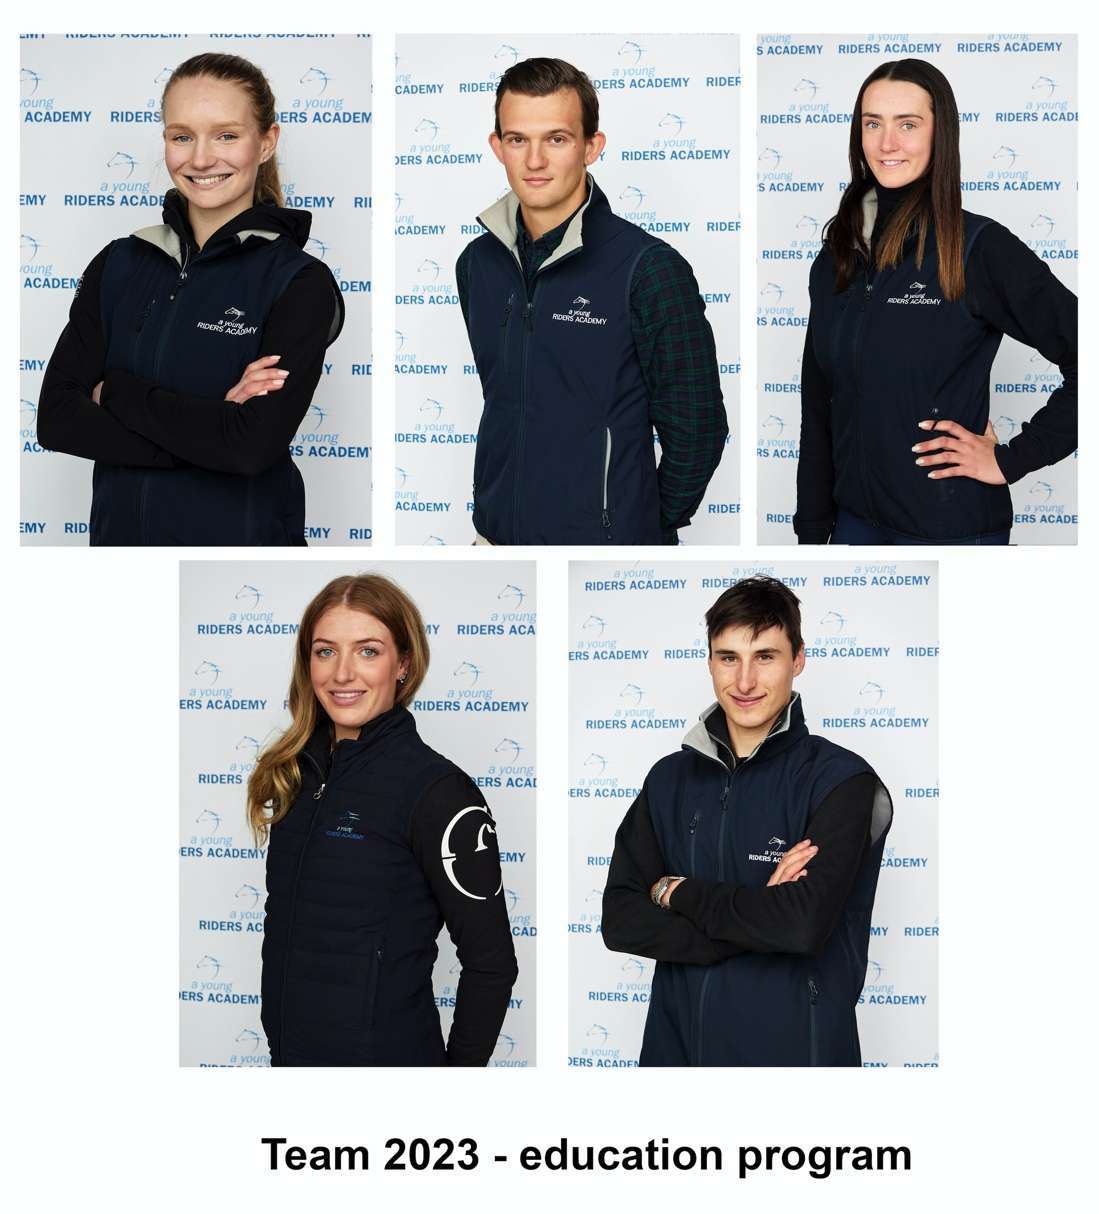 The Education Program Team for 2023 Young Riders Academy